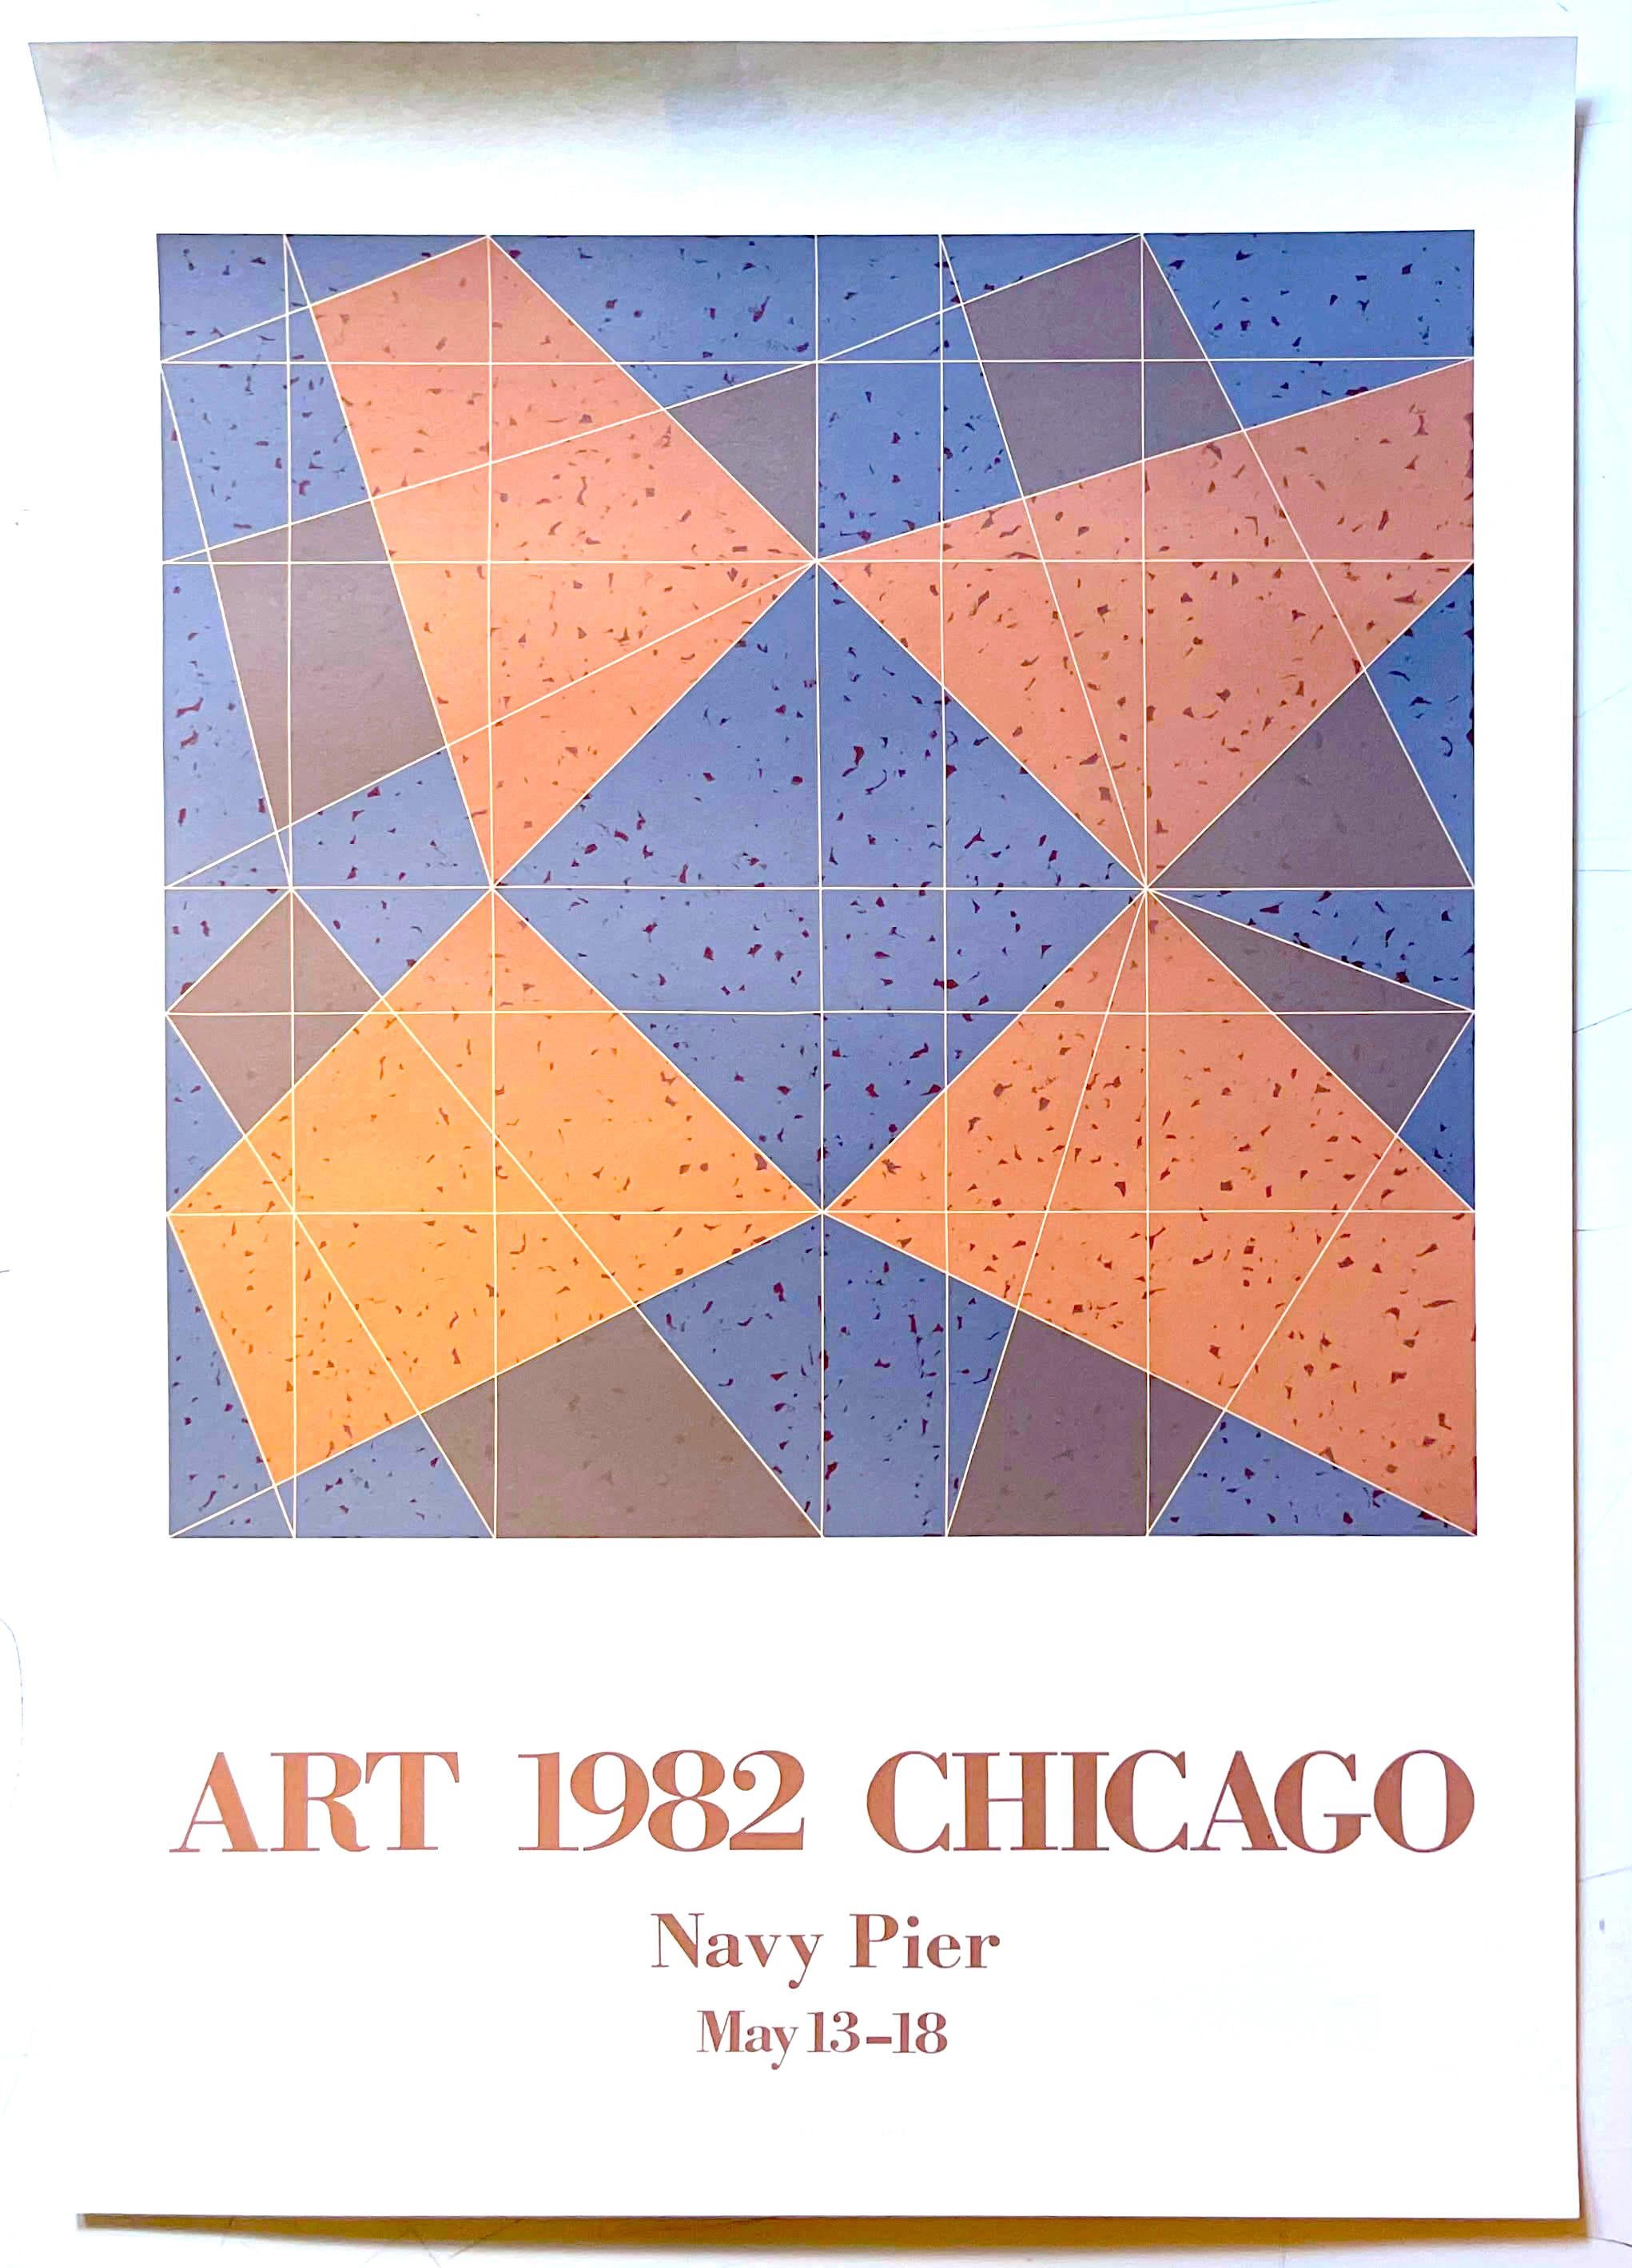 Jack Tworkov
Art 1982 Chicago Navy Pier Poster, 1981
Limited Edition of 1500
Four color limited edition offset lithograph poster on 300 gram Dove 500 white acid free, 100% cotton fiber paper
Bears artist copyright at the bottom and credit to the